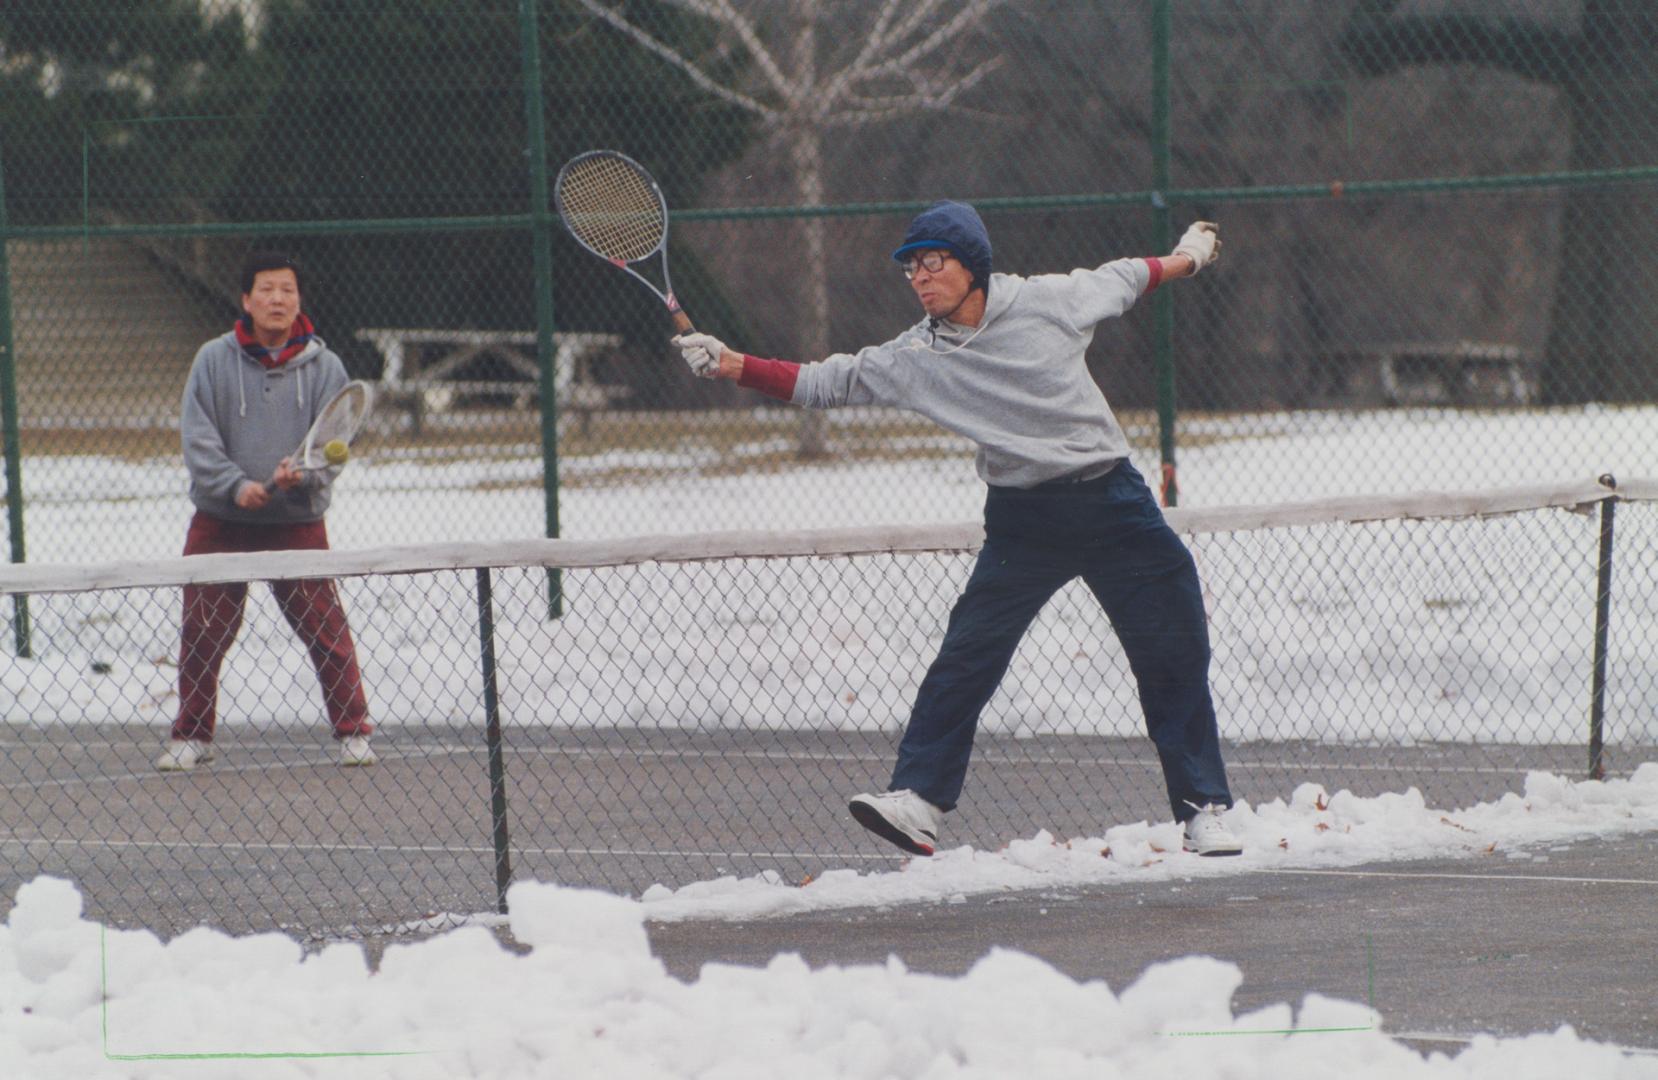 Diehard tennis players Kim in Bok (foreground) and Kiwoong Bae don't let a little snow keep them from the court cleared all winter